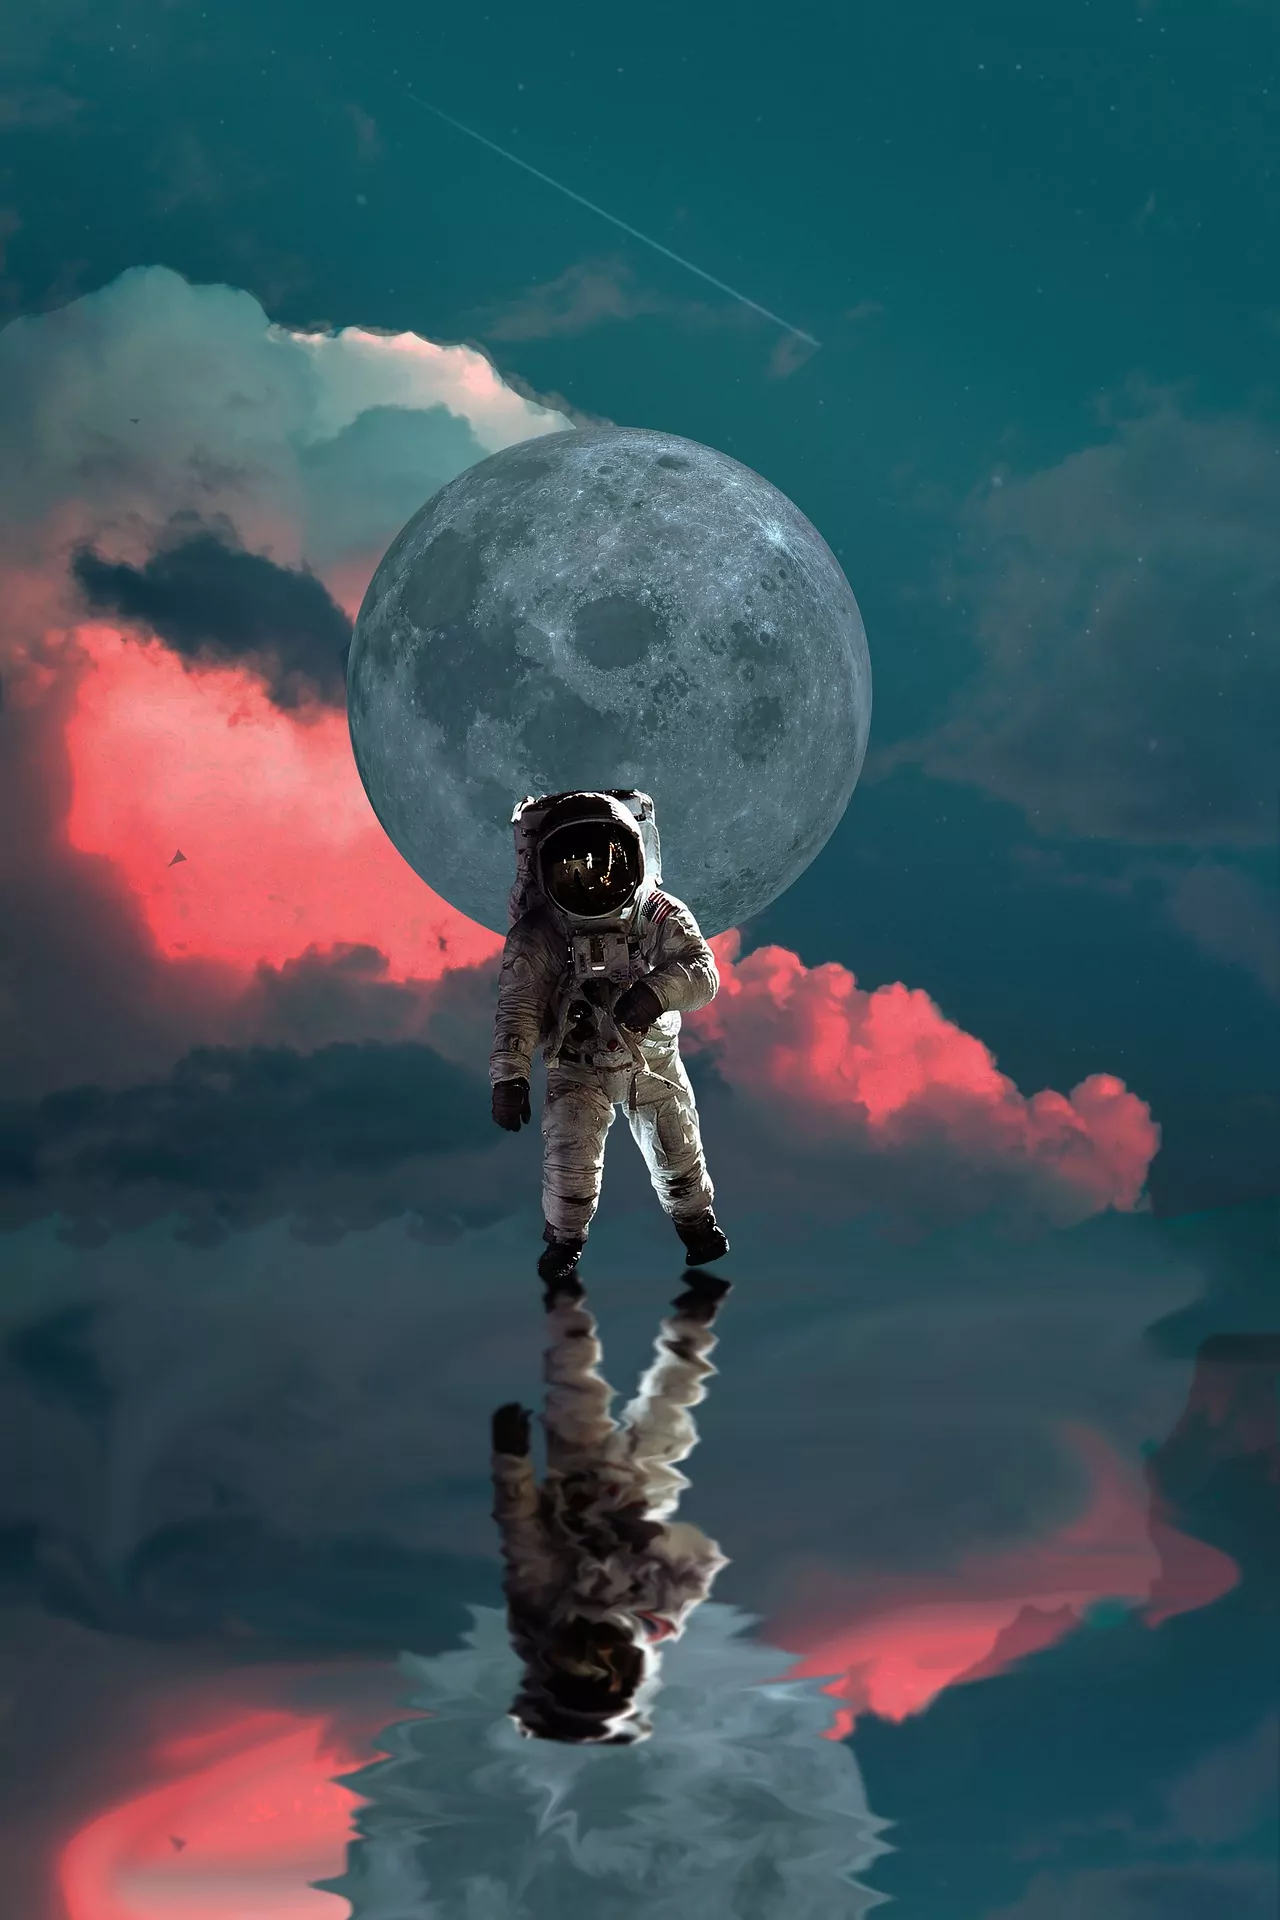 An image of an astronaut as he walks on a water-like substance. The full-scale of the moon can be seen directly behind the astronaut. A pink cloud cuts across the frame giving the image a supernatural appearance.